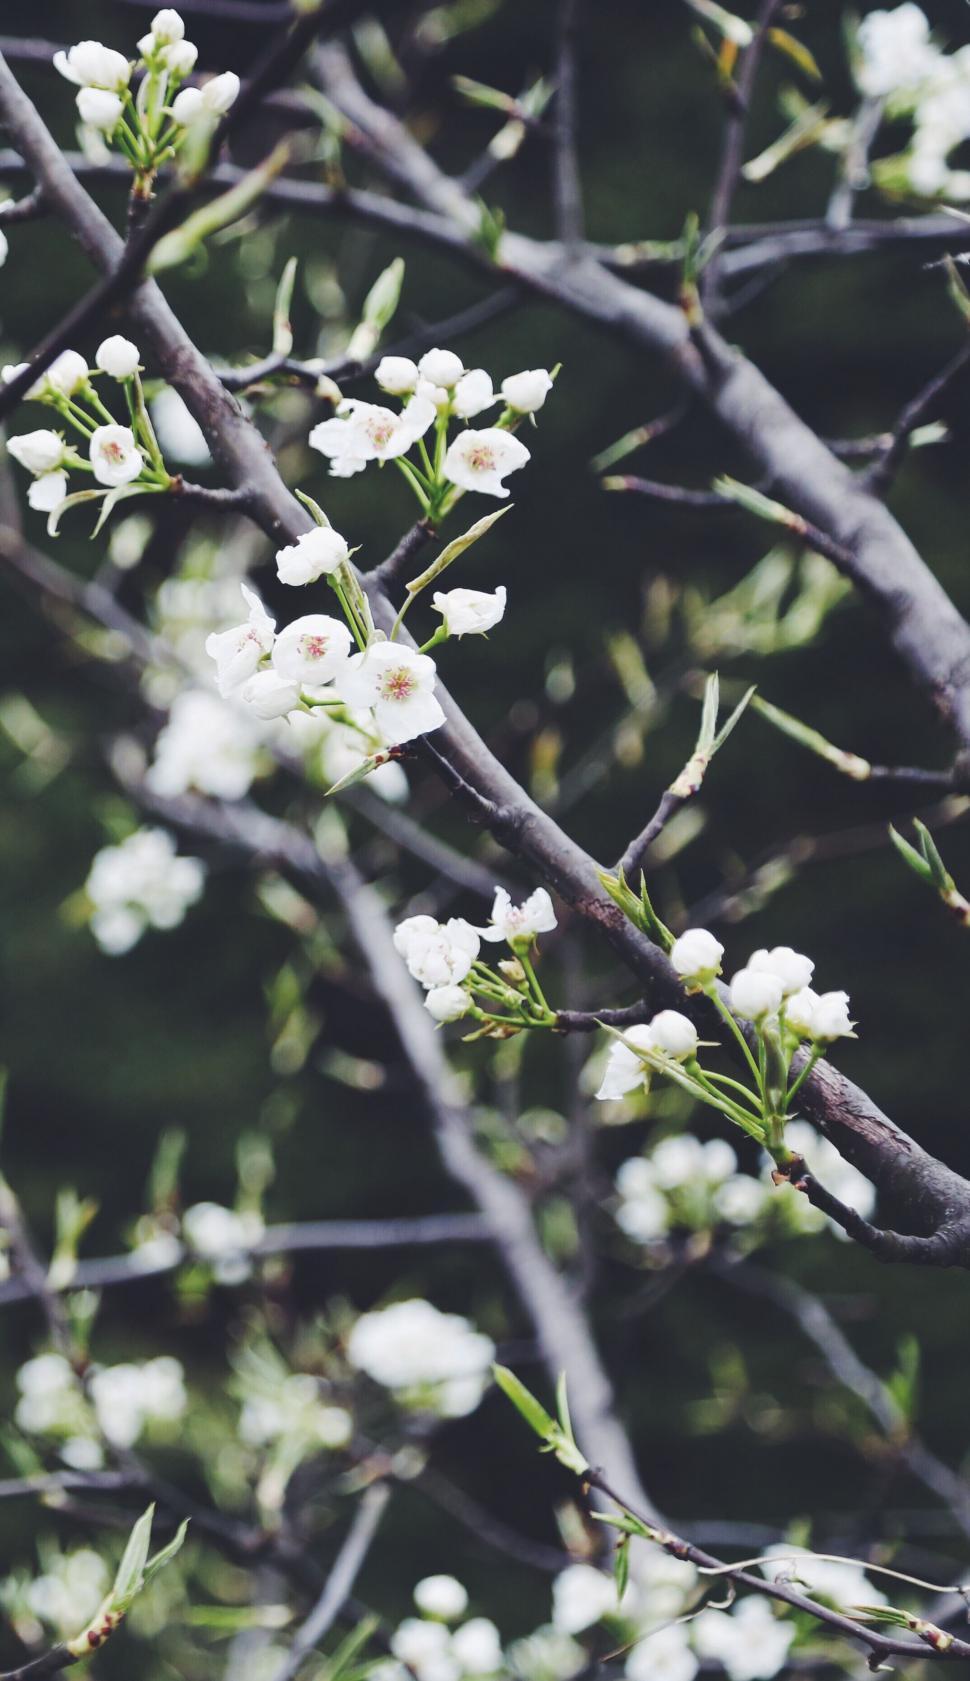 Free Image of White Flowers Blooming on Tree Branch 